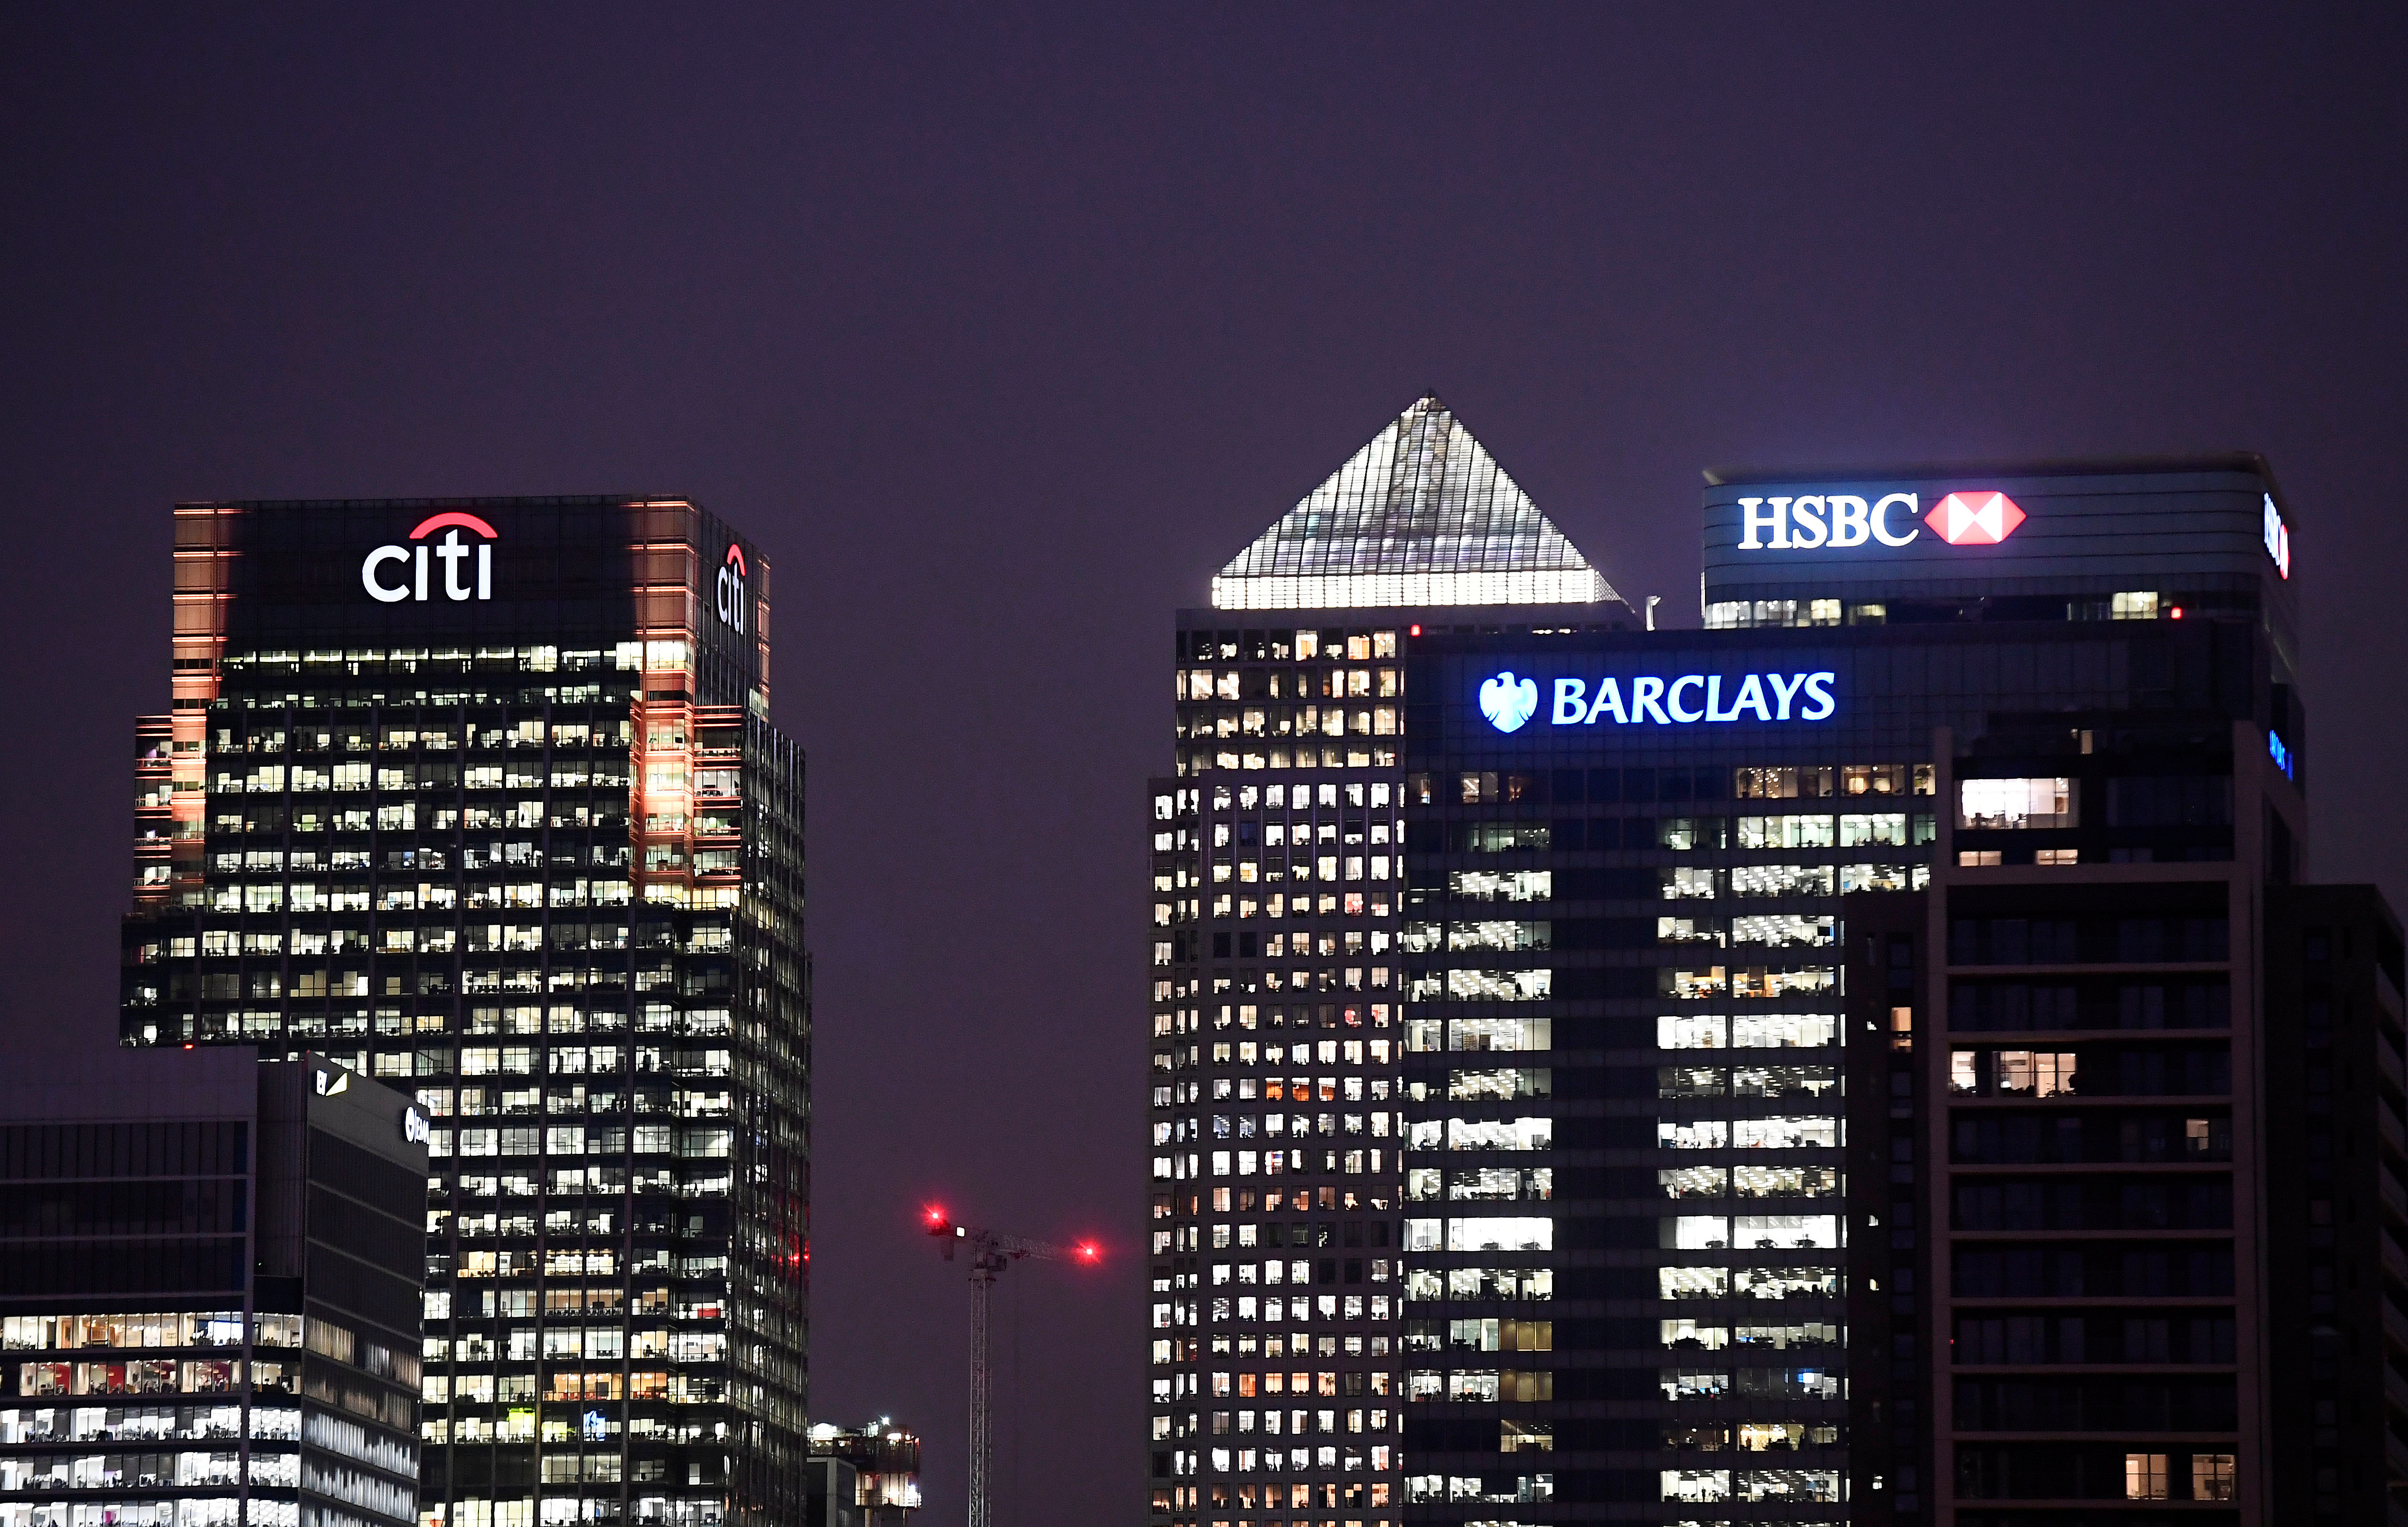 Office blocks of Citi, Barclays, and HSBC banks are seen at dusk in the Canary Wharf financial district in London,